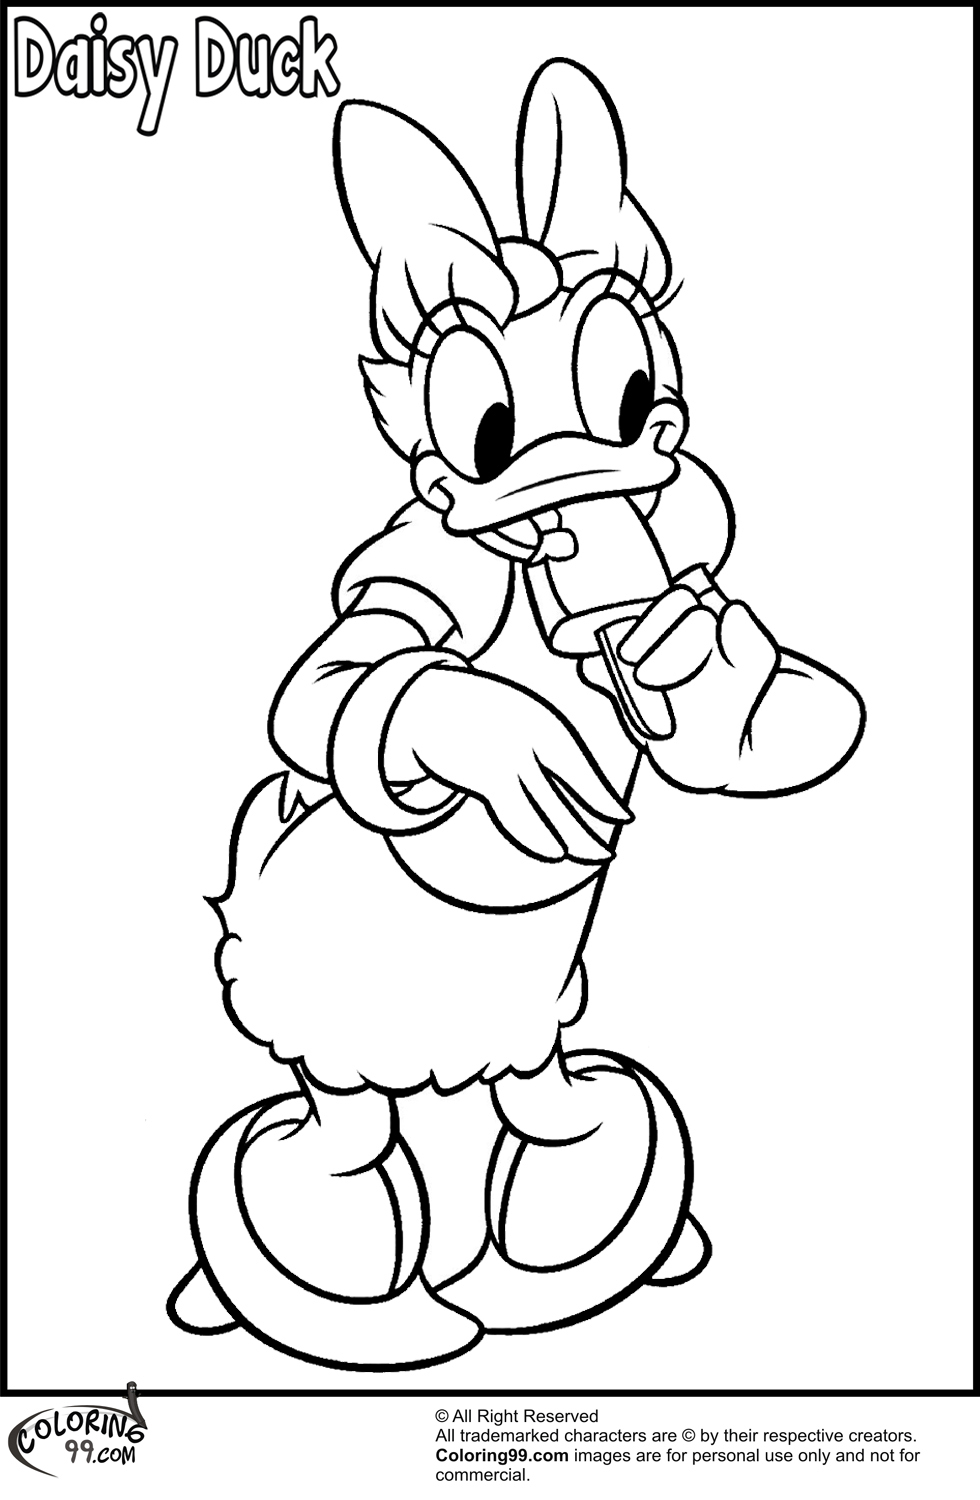 Download Daisy Duck Coloring Pages | Minister Coloring